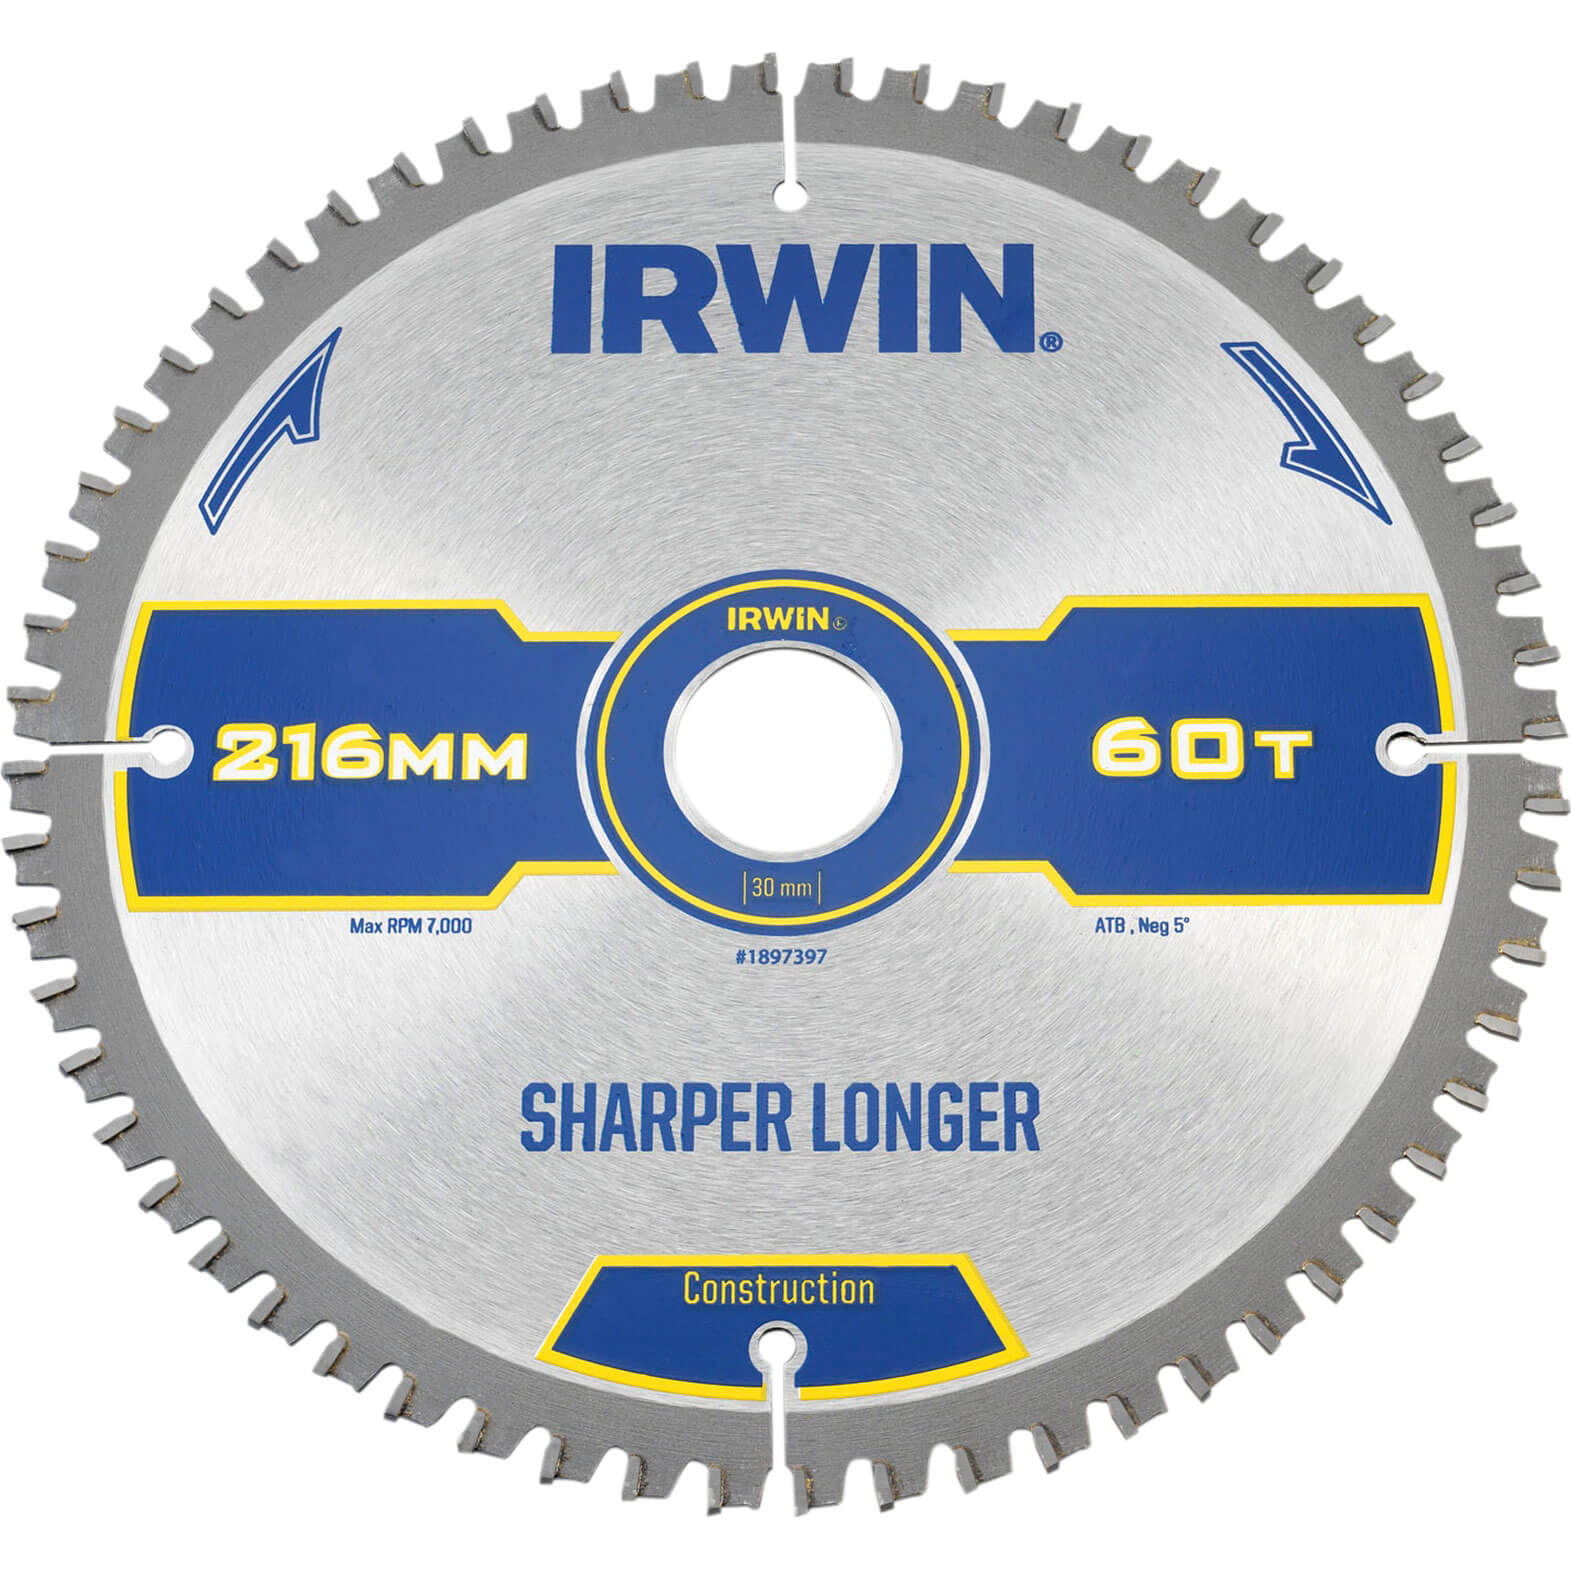 Image of Irwin ATB Ultra Construction Circular Saw Blade 216mm 60T 30mm